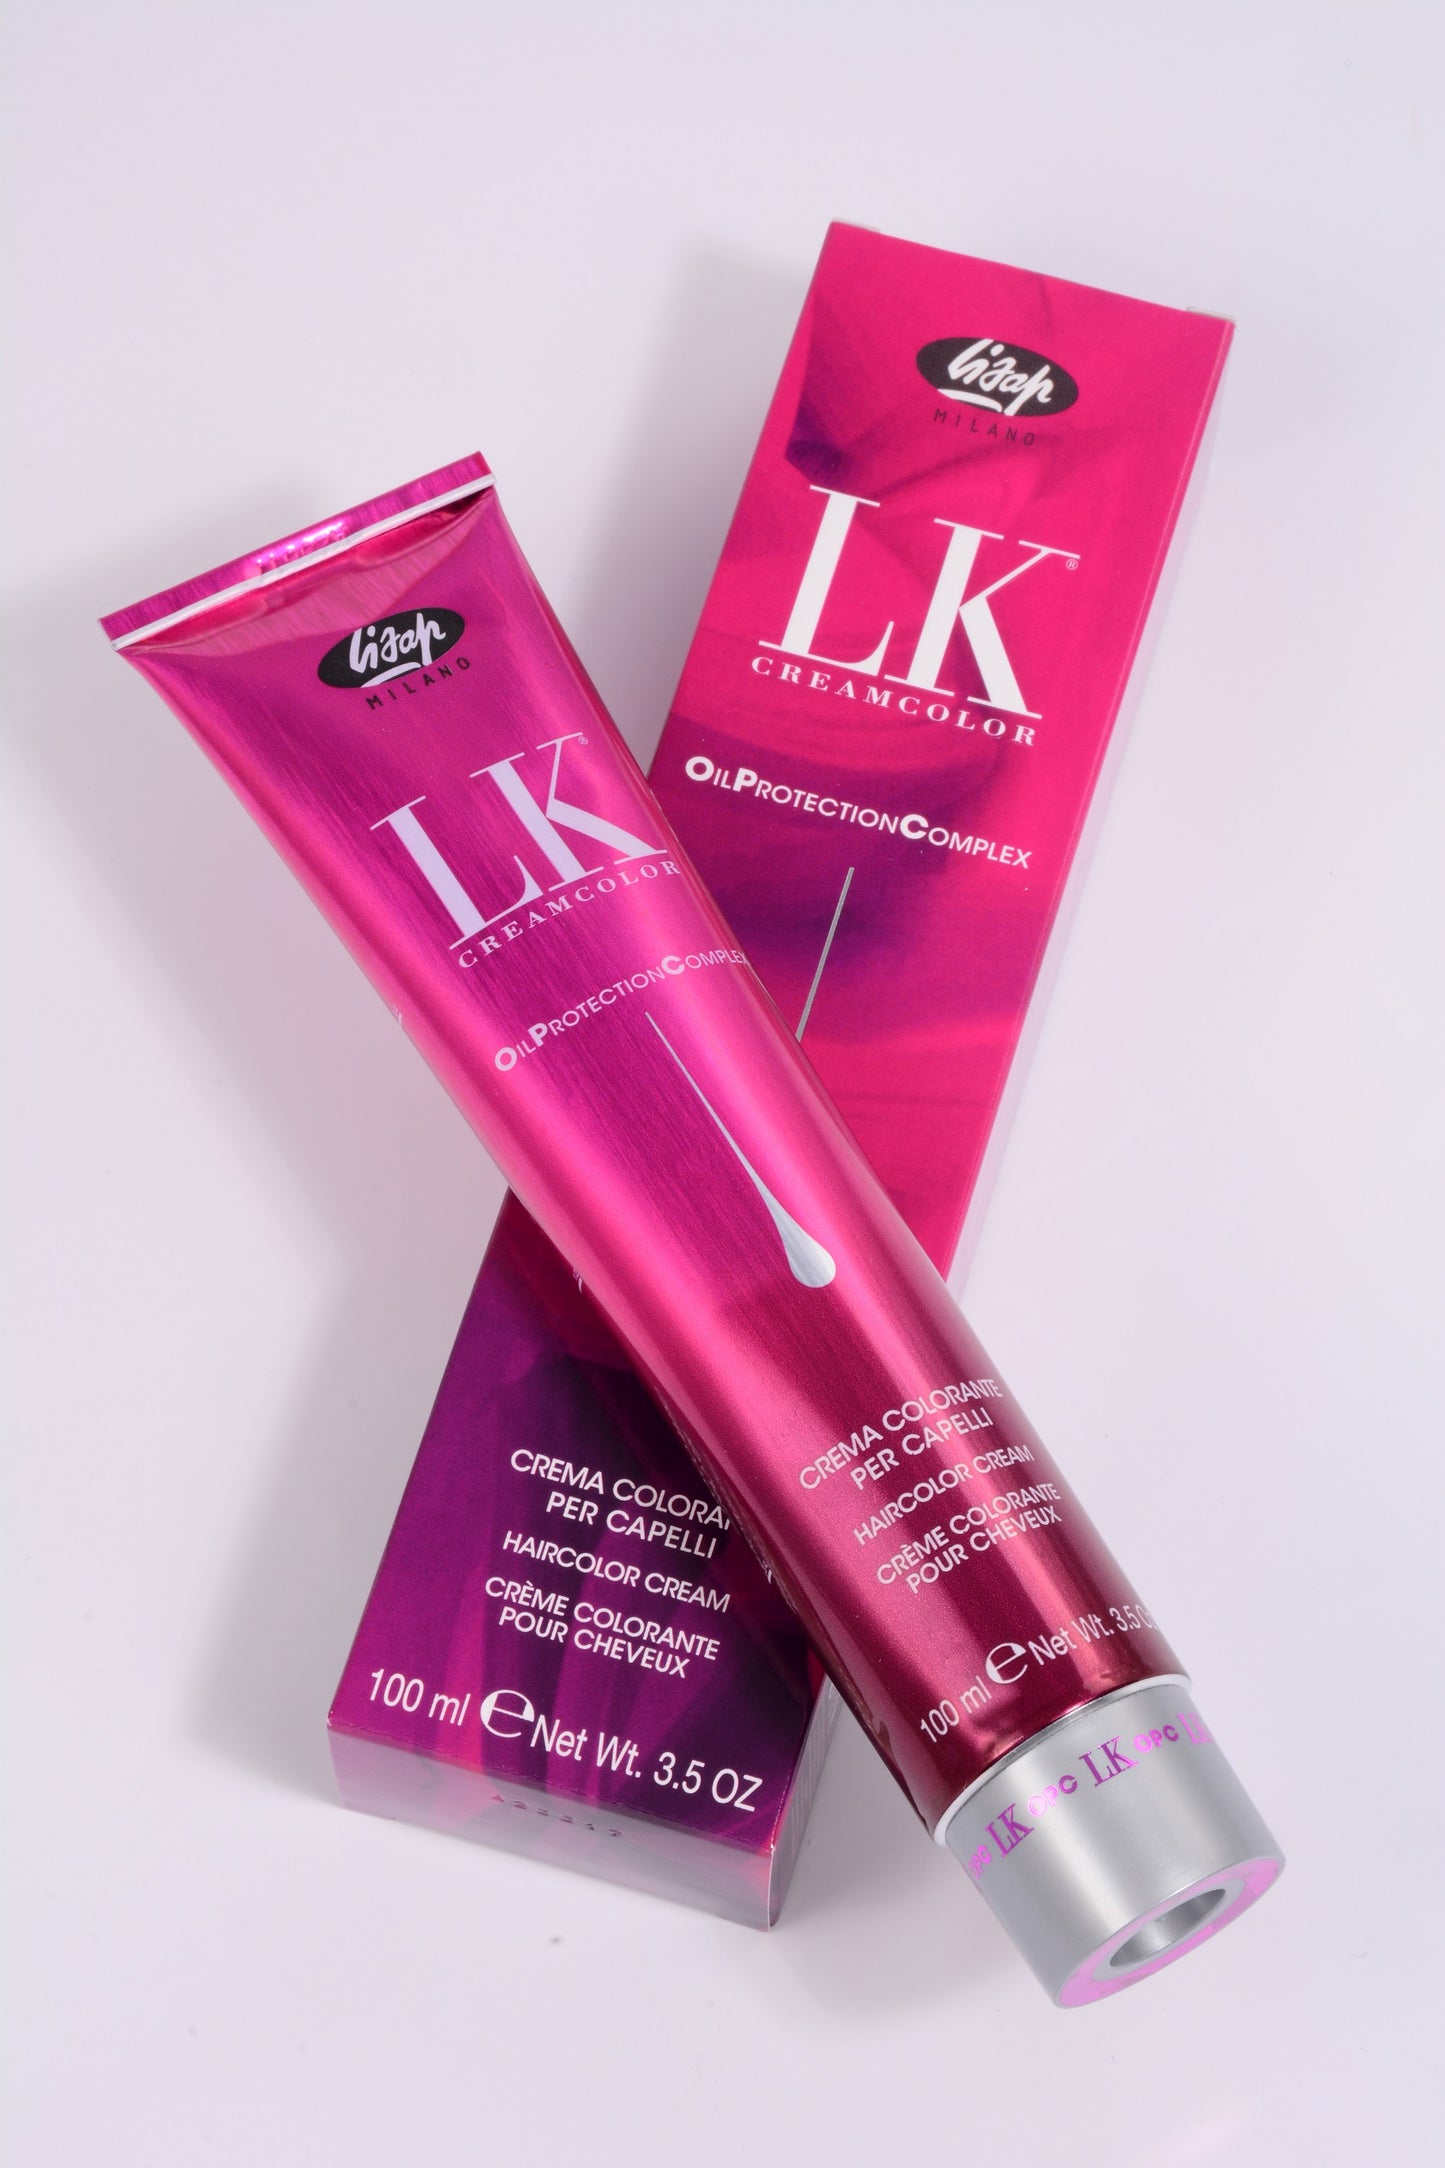 LK Creamcolor 10/7 Oil Protection Complex